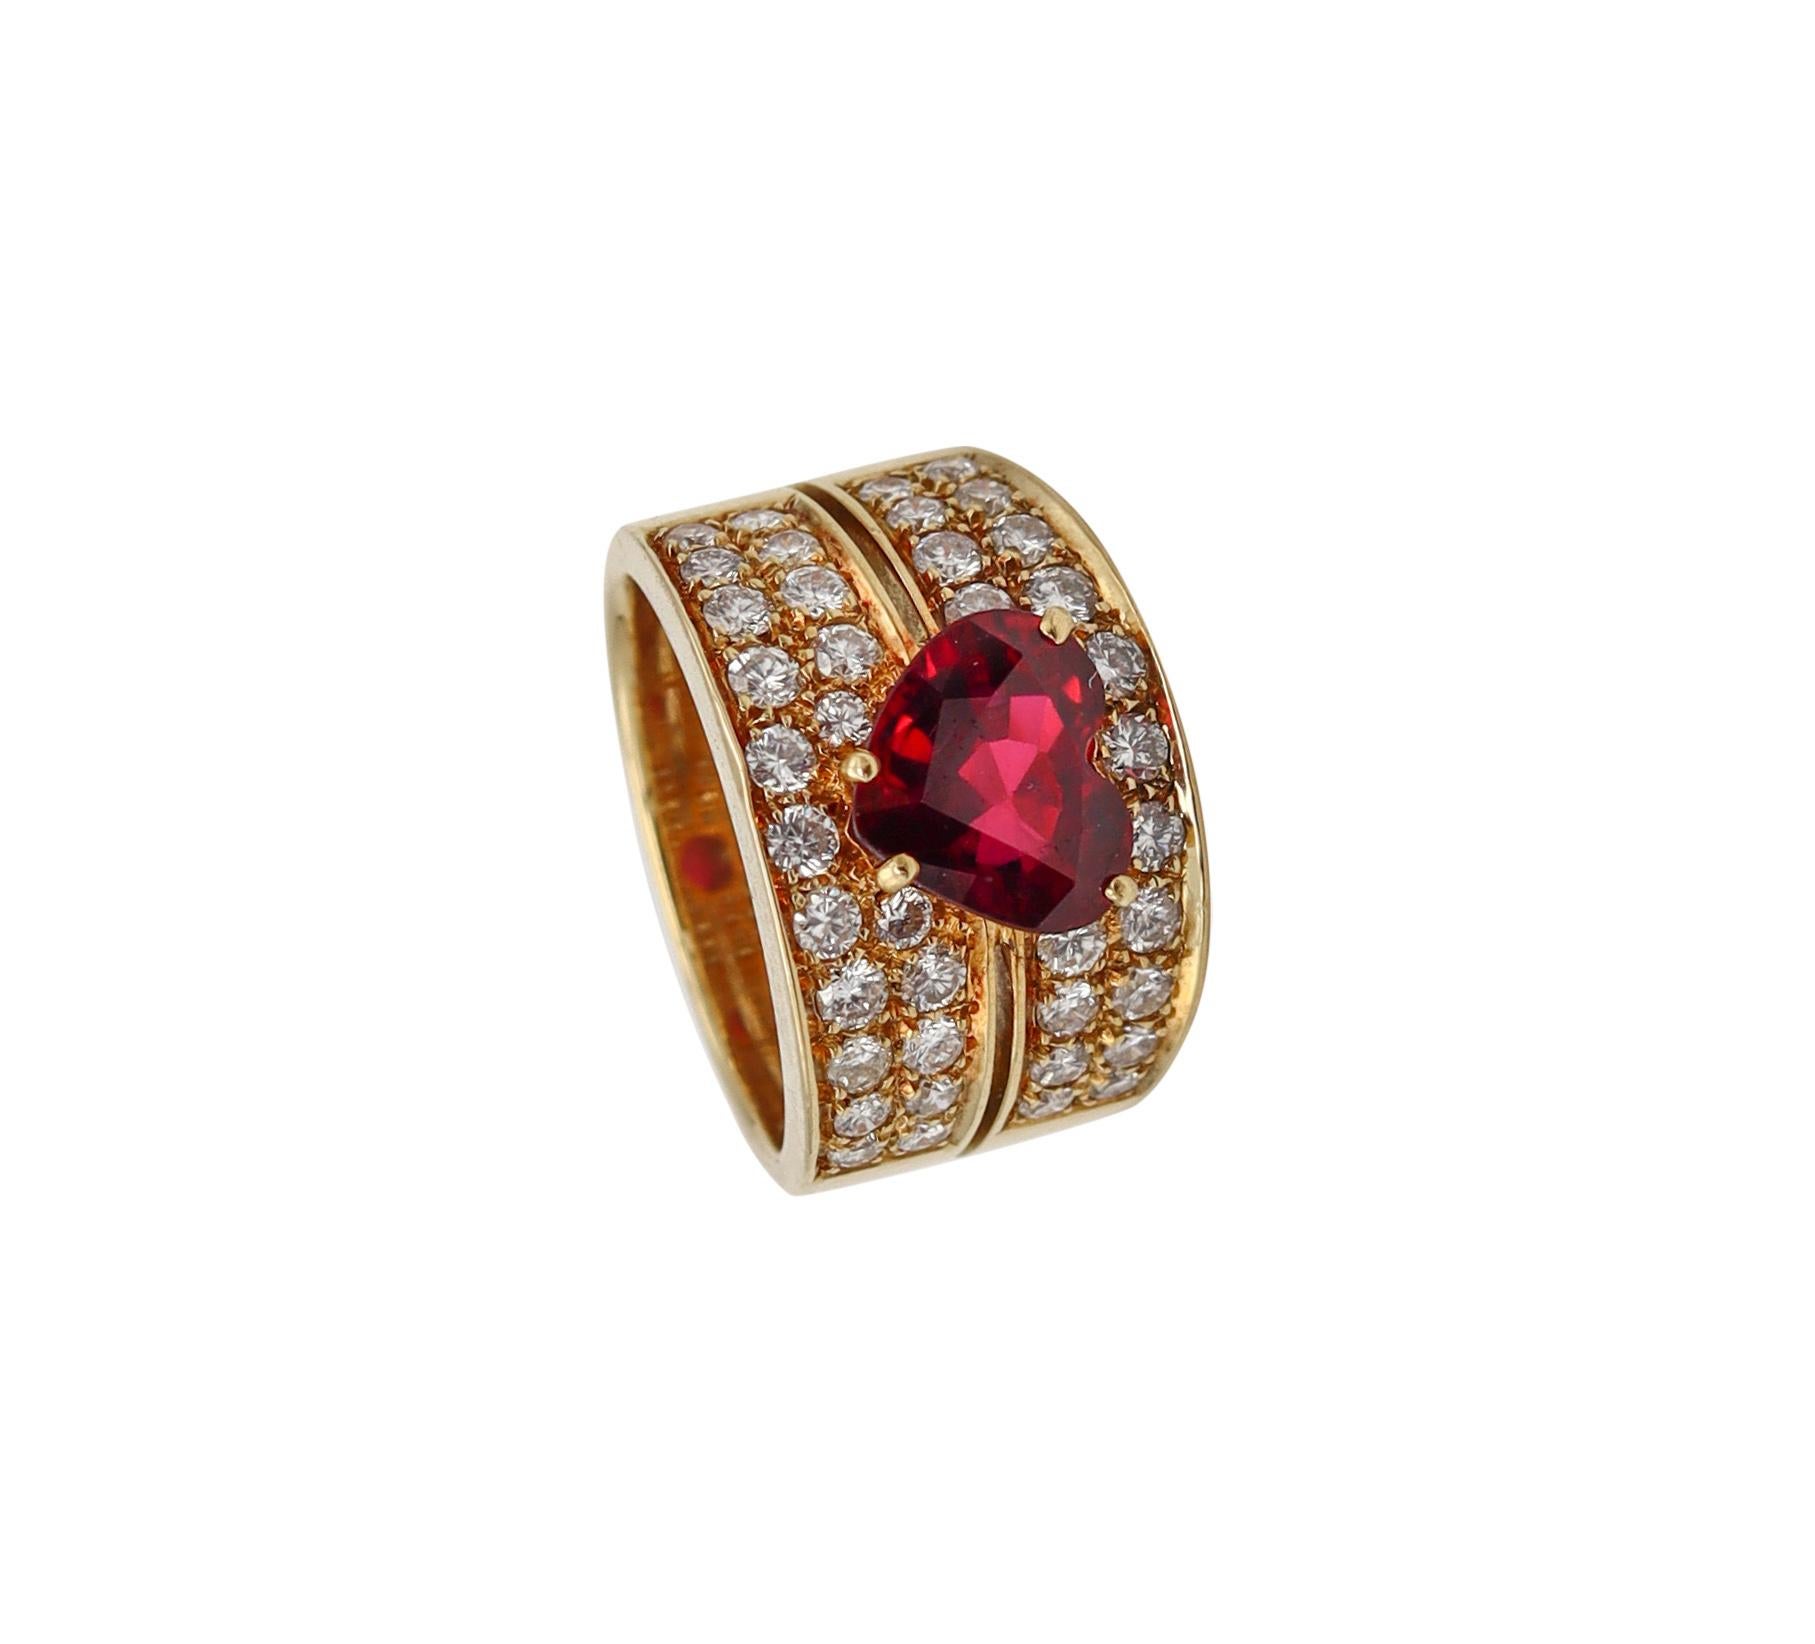 Cocktail ring with exceptional gemstones.

Beautiful and colorful Italian piece, crafted in solid yellow gold of 18 karats, with high polished finish and embellished with a great selection of natural gemstones.

Mounted in the center in a